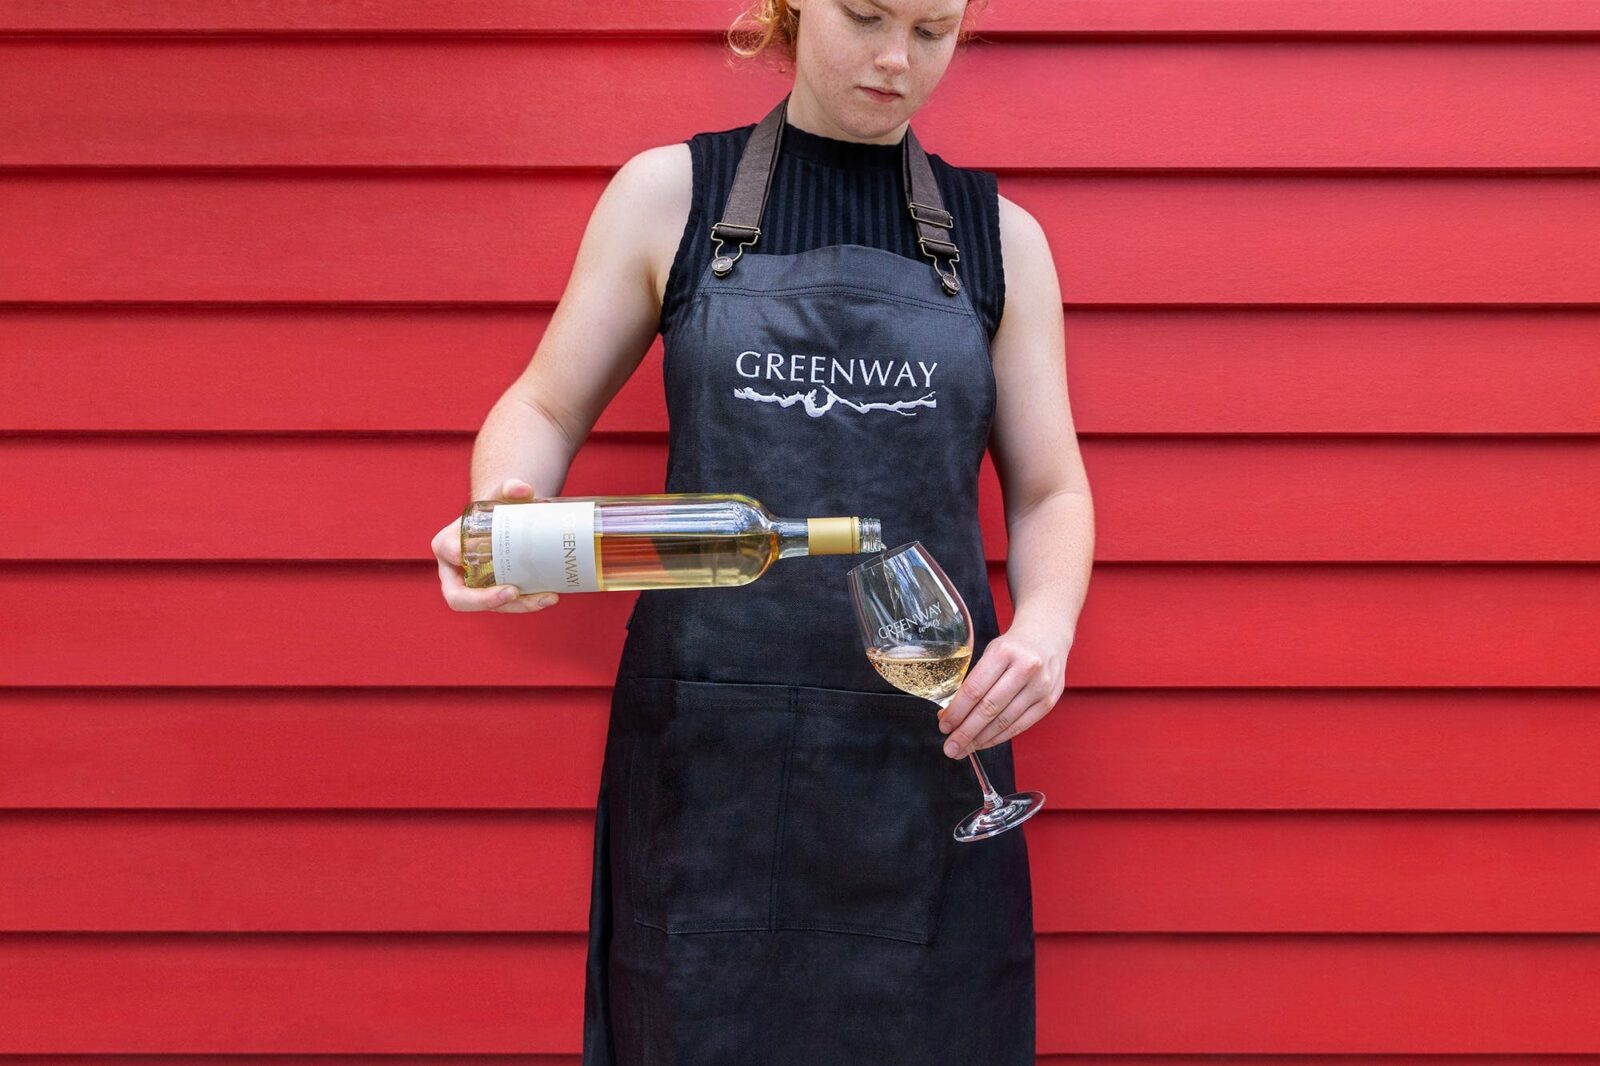 A Greenway Wines team member is pouring a glass of delicate pinot grigio